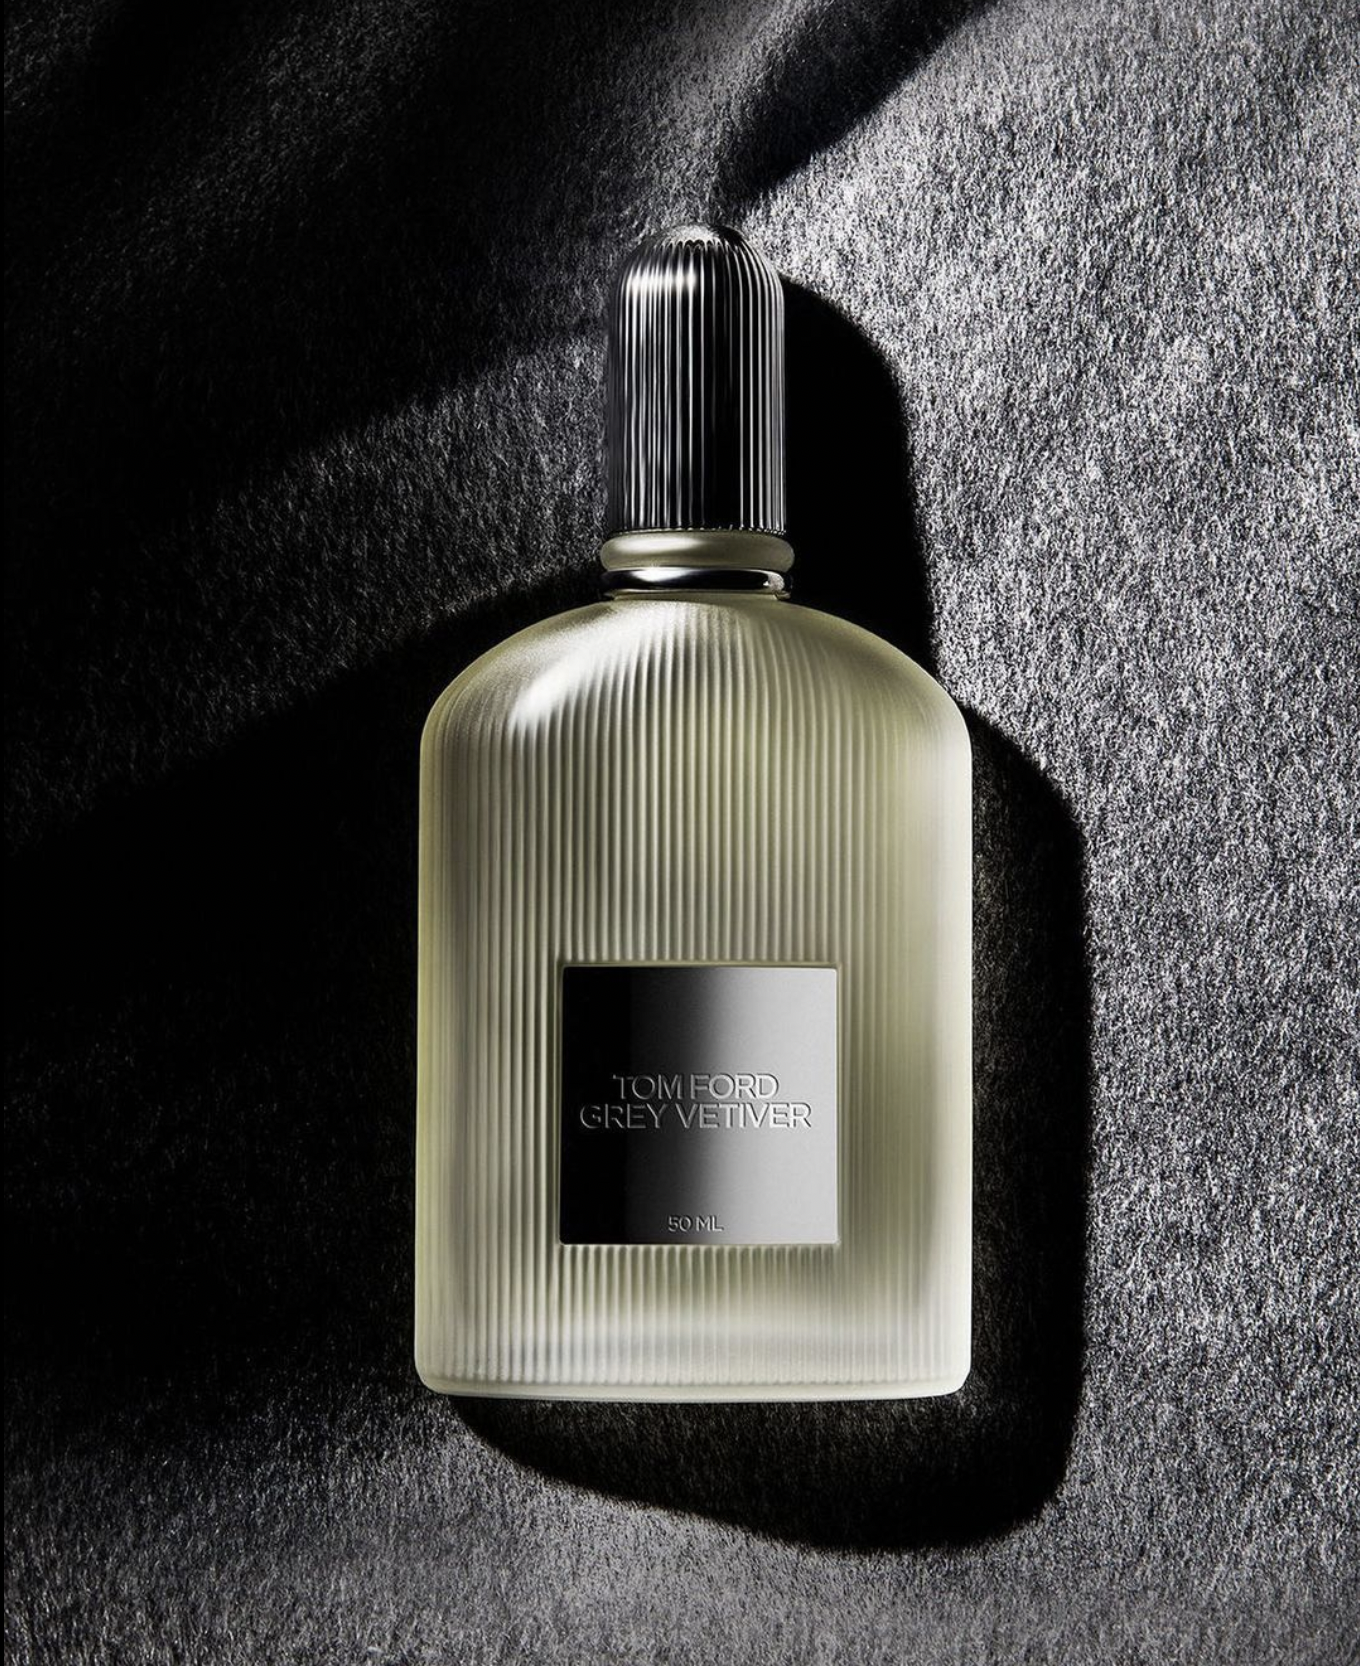 Tom-Ford-Grey-Vetiver-Parfum-Campaign-3-2023.png